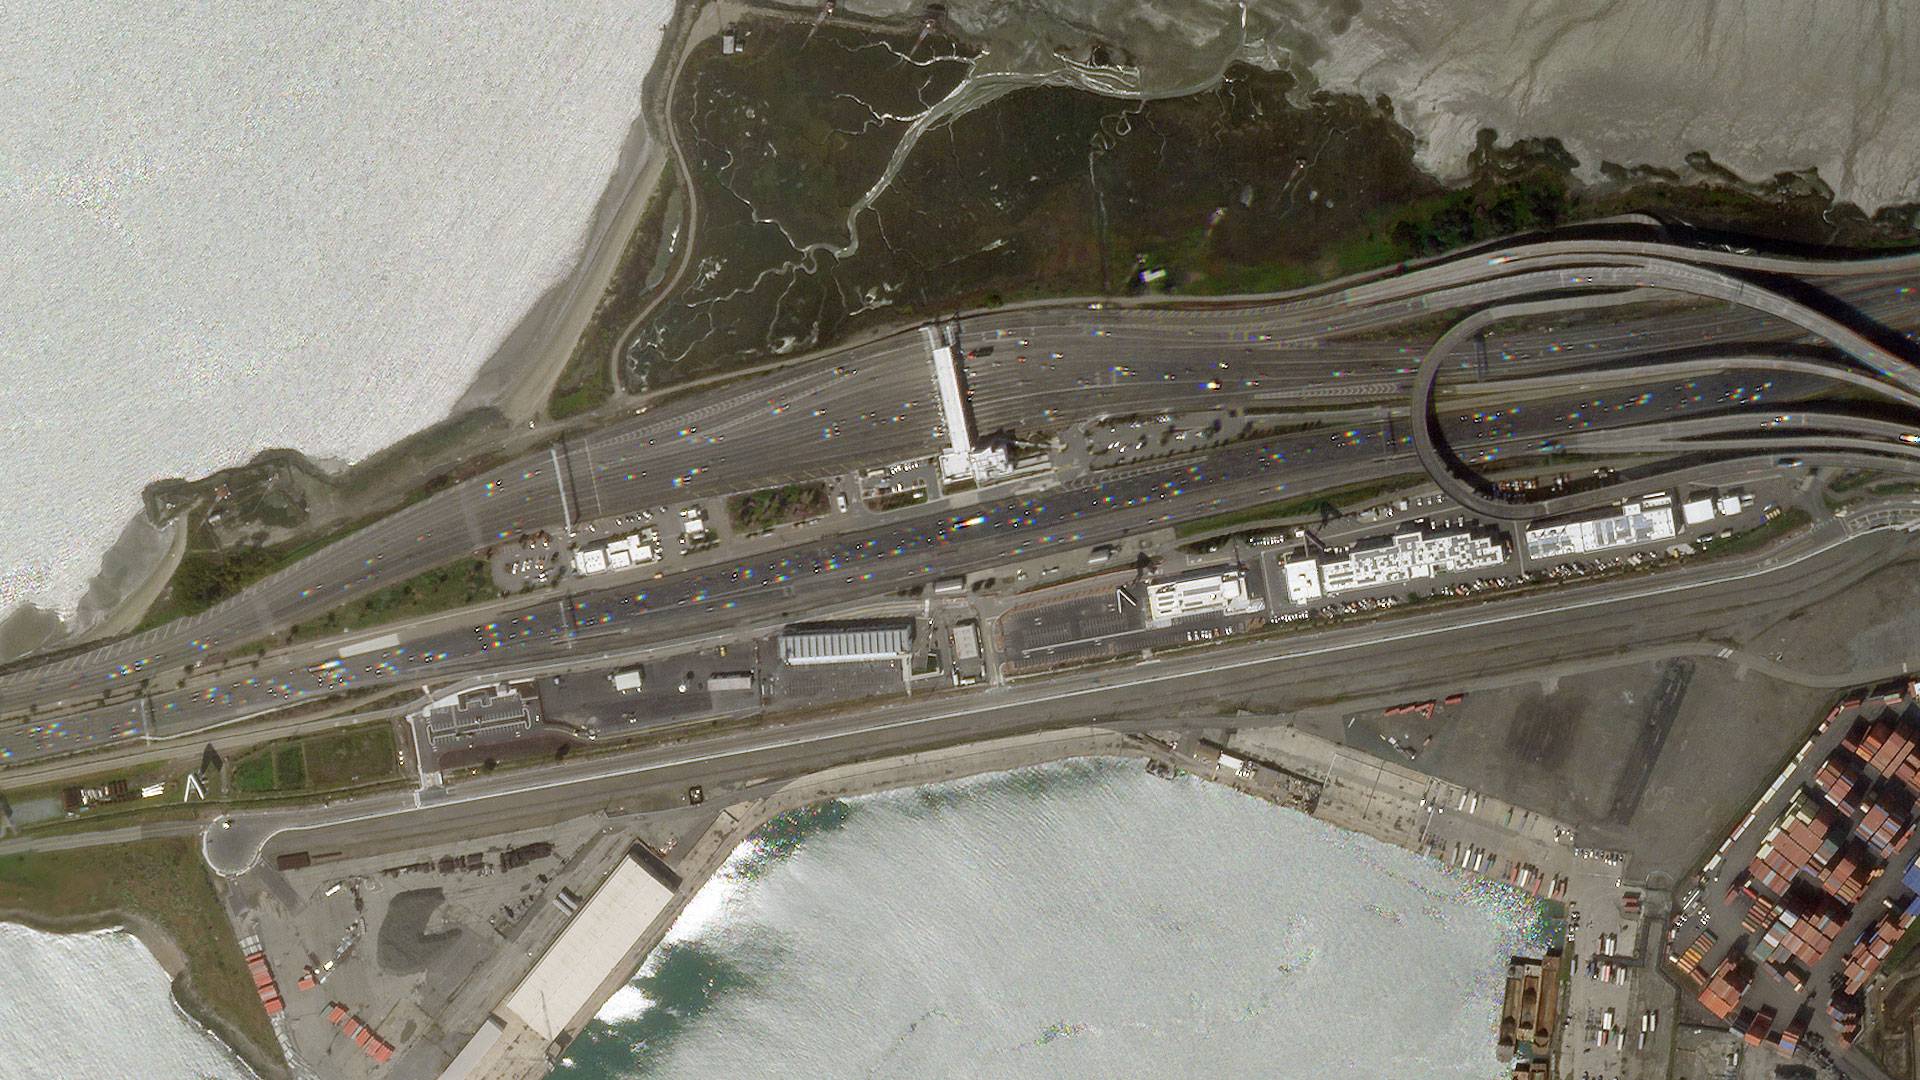 Satellite view of the westbound toll booths on the San Francisco Bay Bridge Mar. 16, 2020, 1:00 p.m. (Planet)